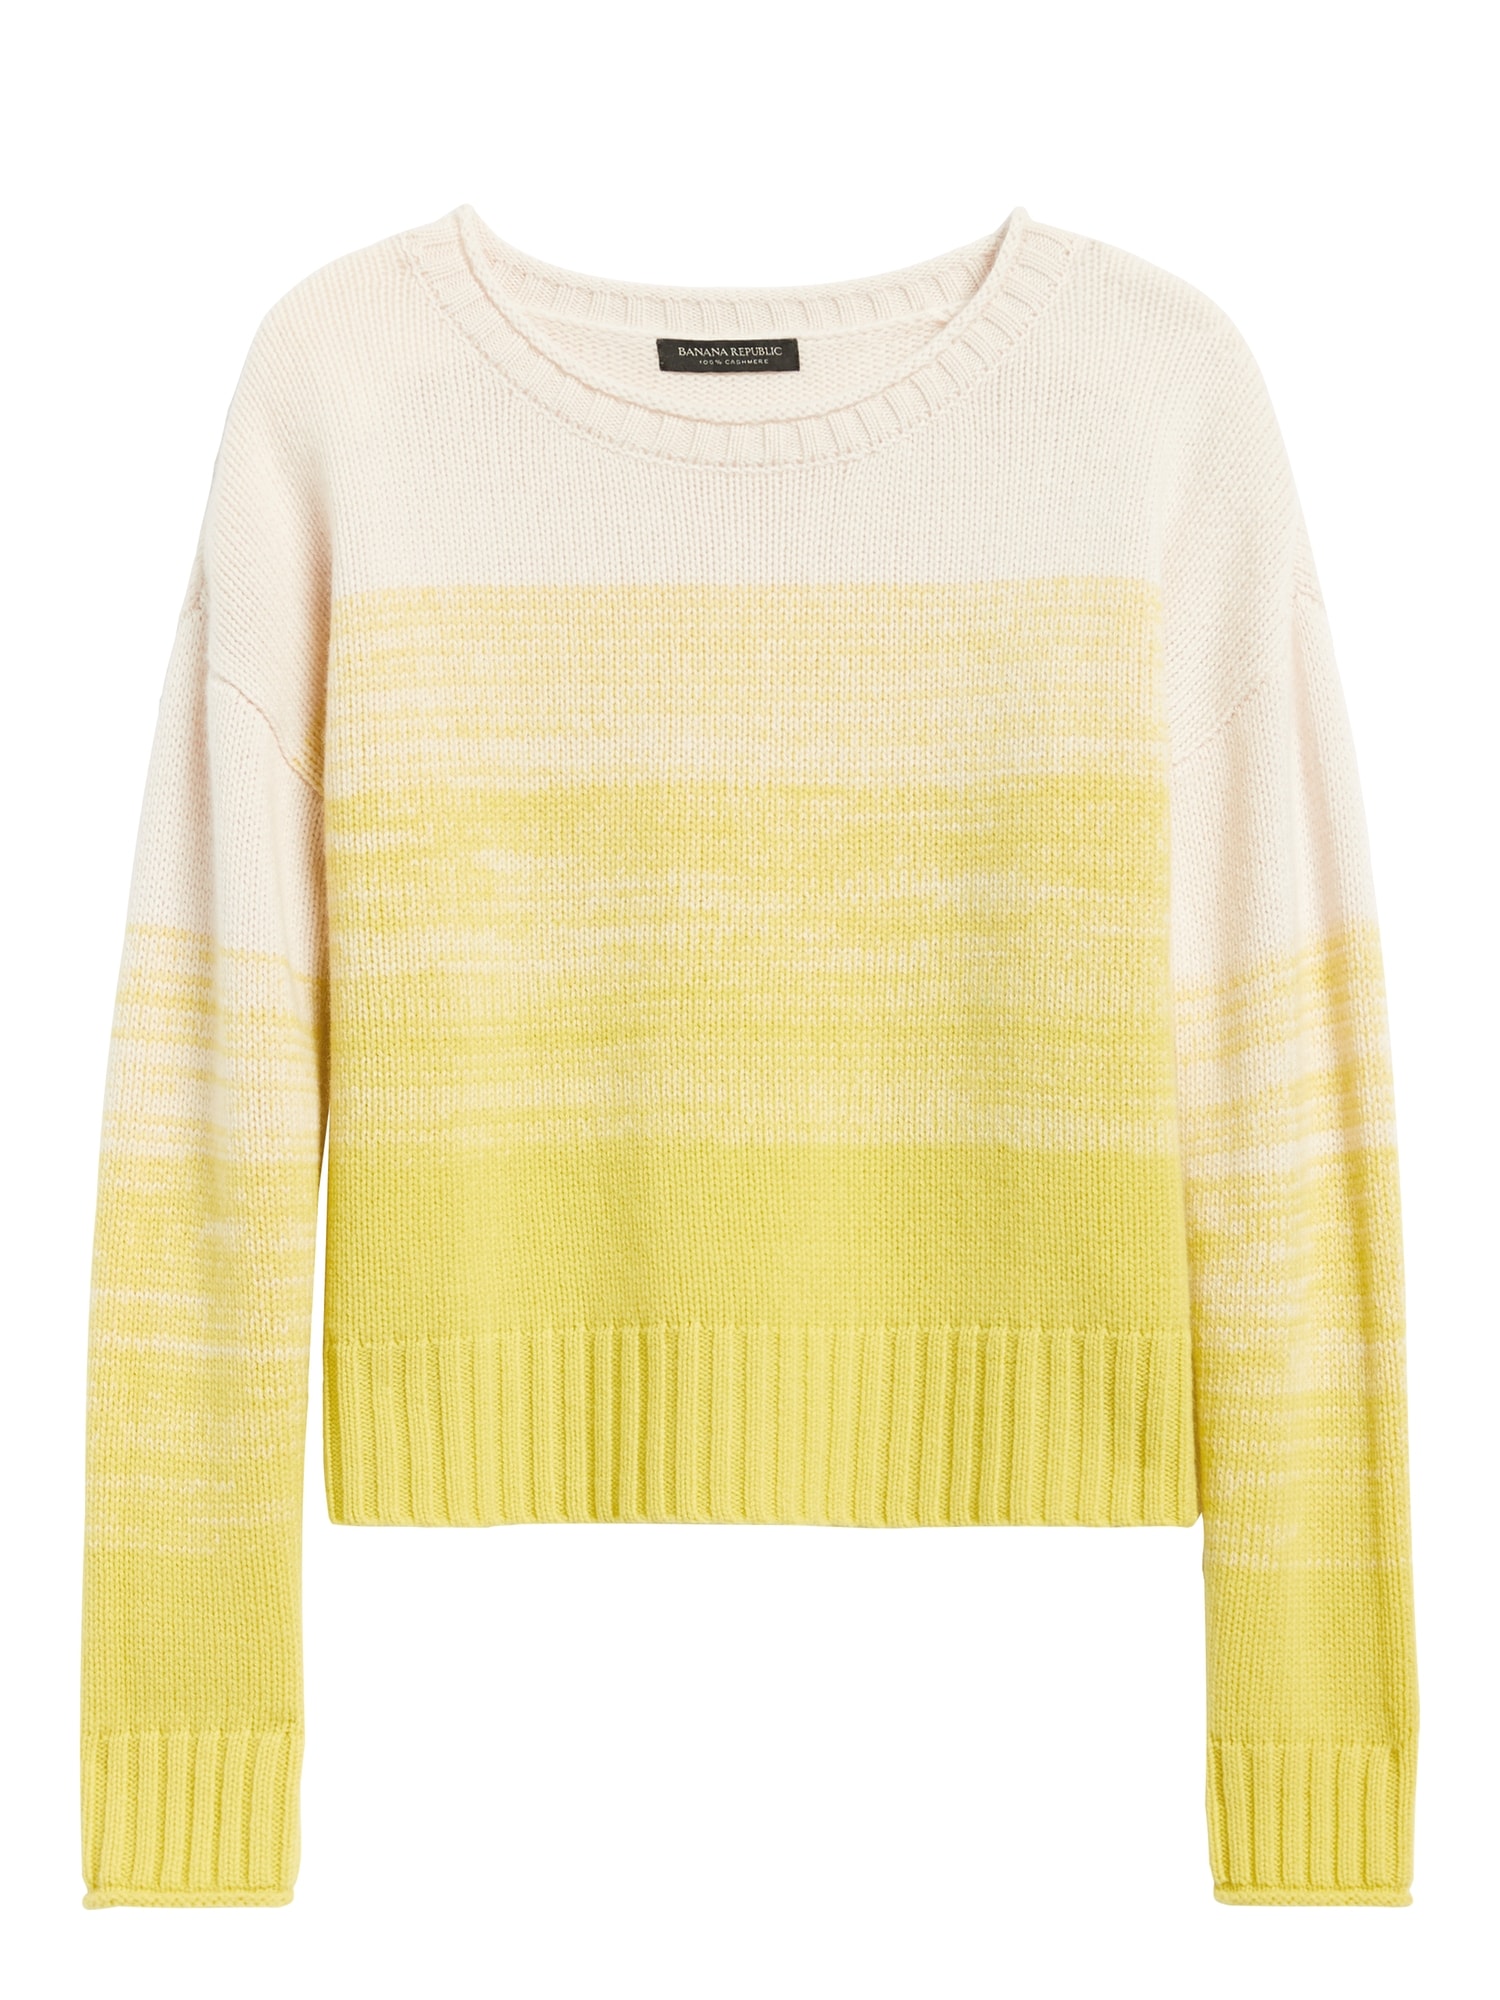 Cashmere Ombré Cropped Sweater